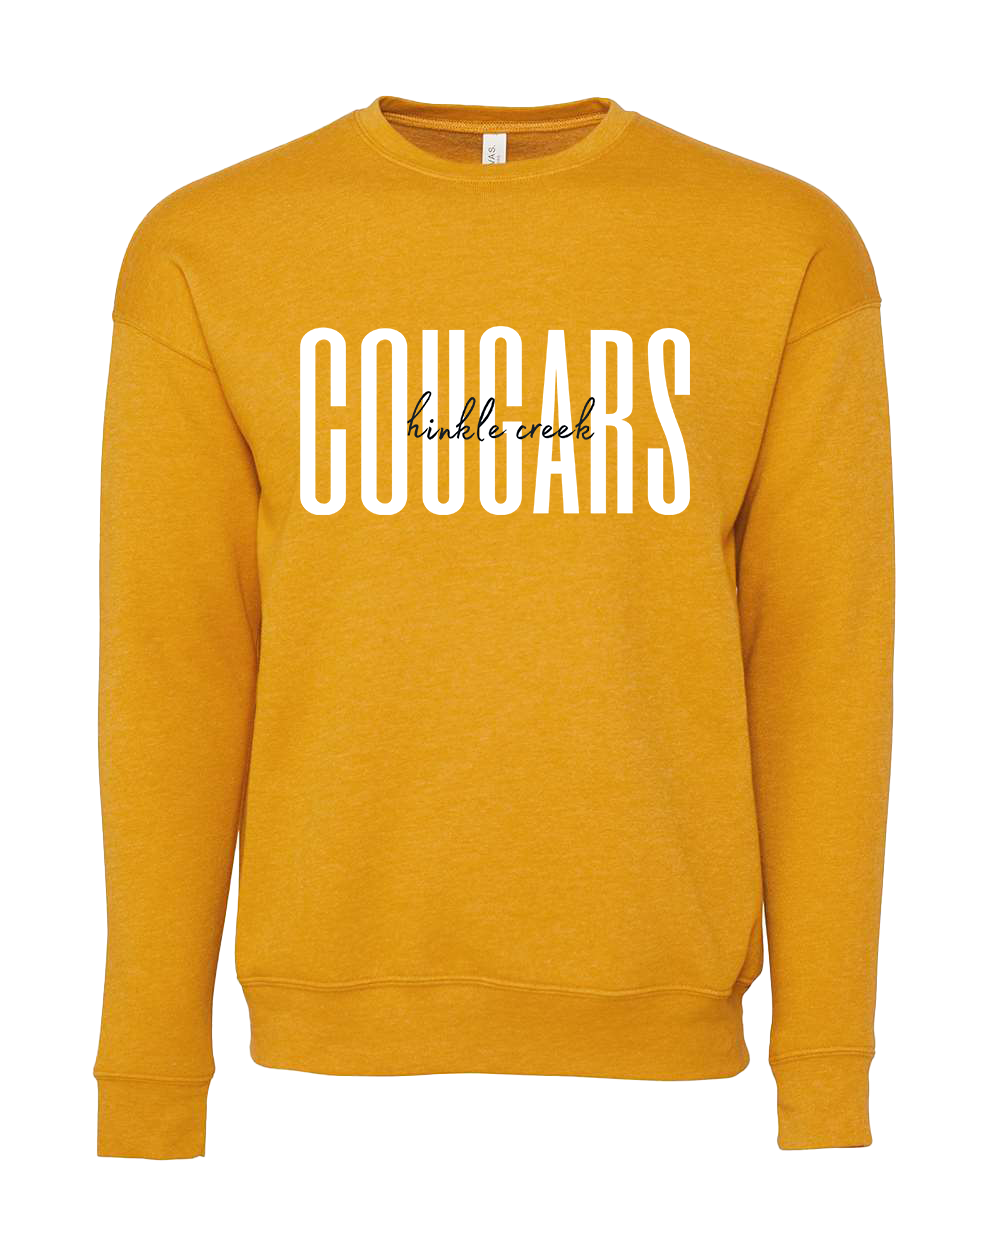 Hinkle Creek Cougars Tall Font Crew - Various Colors